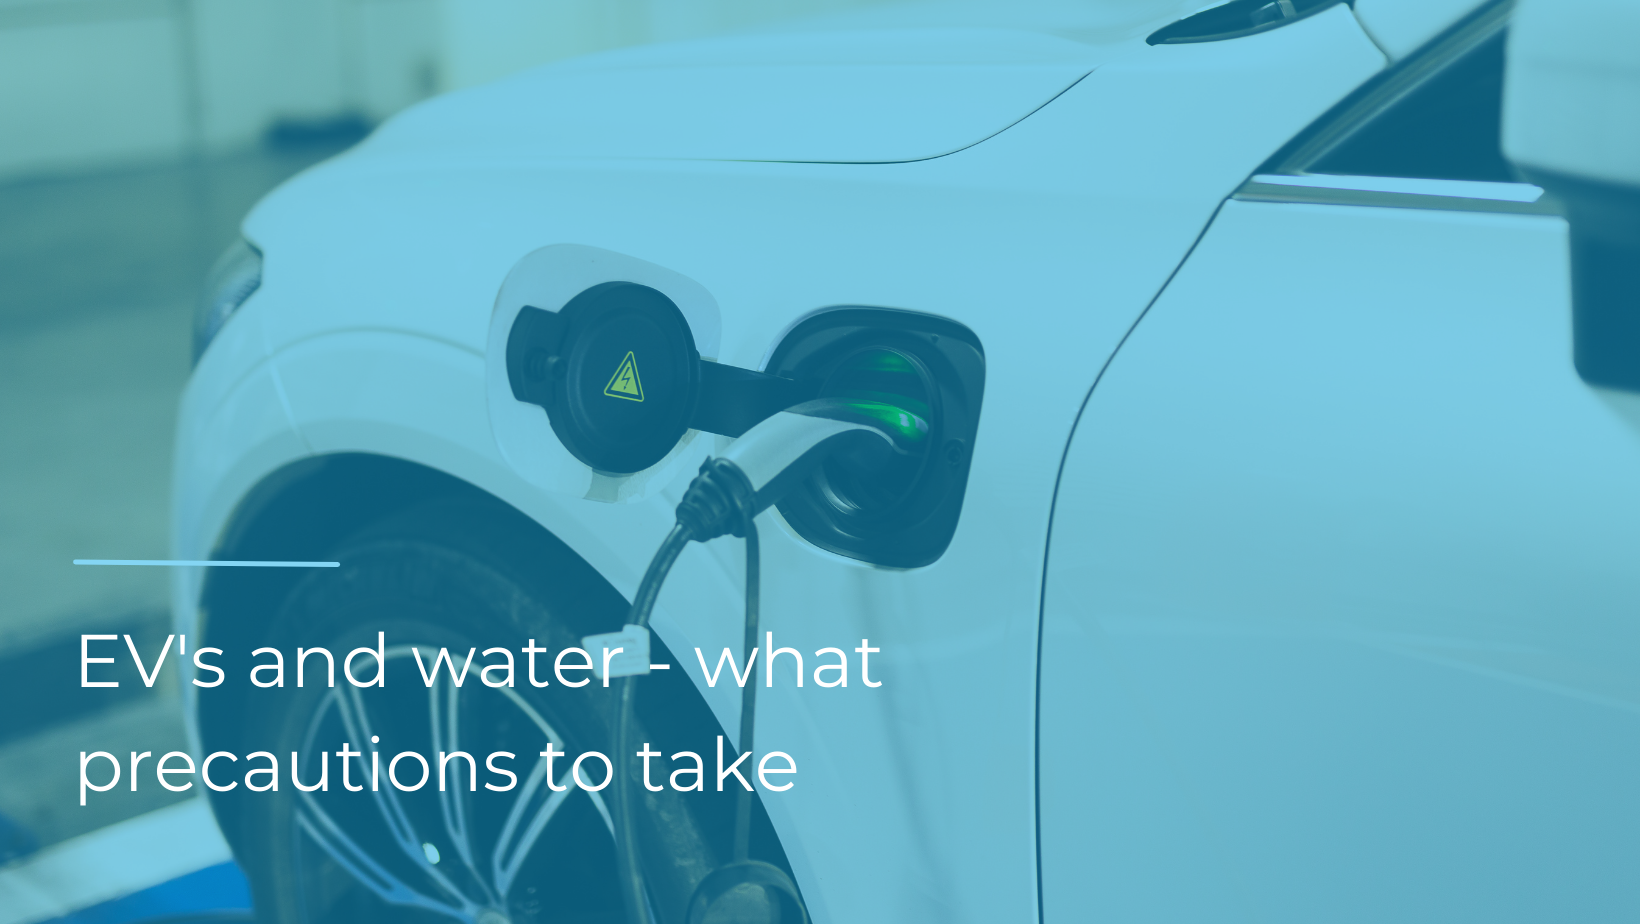 Electric Vehicles in Water - What Precautions to Take